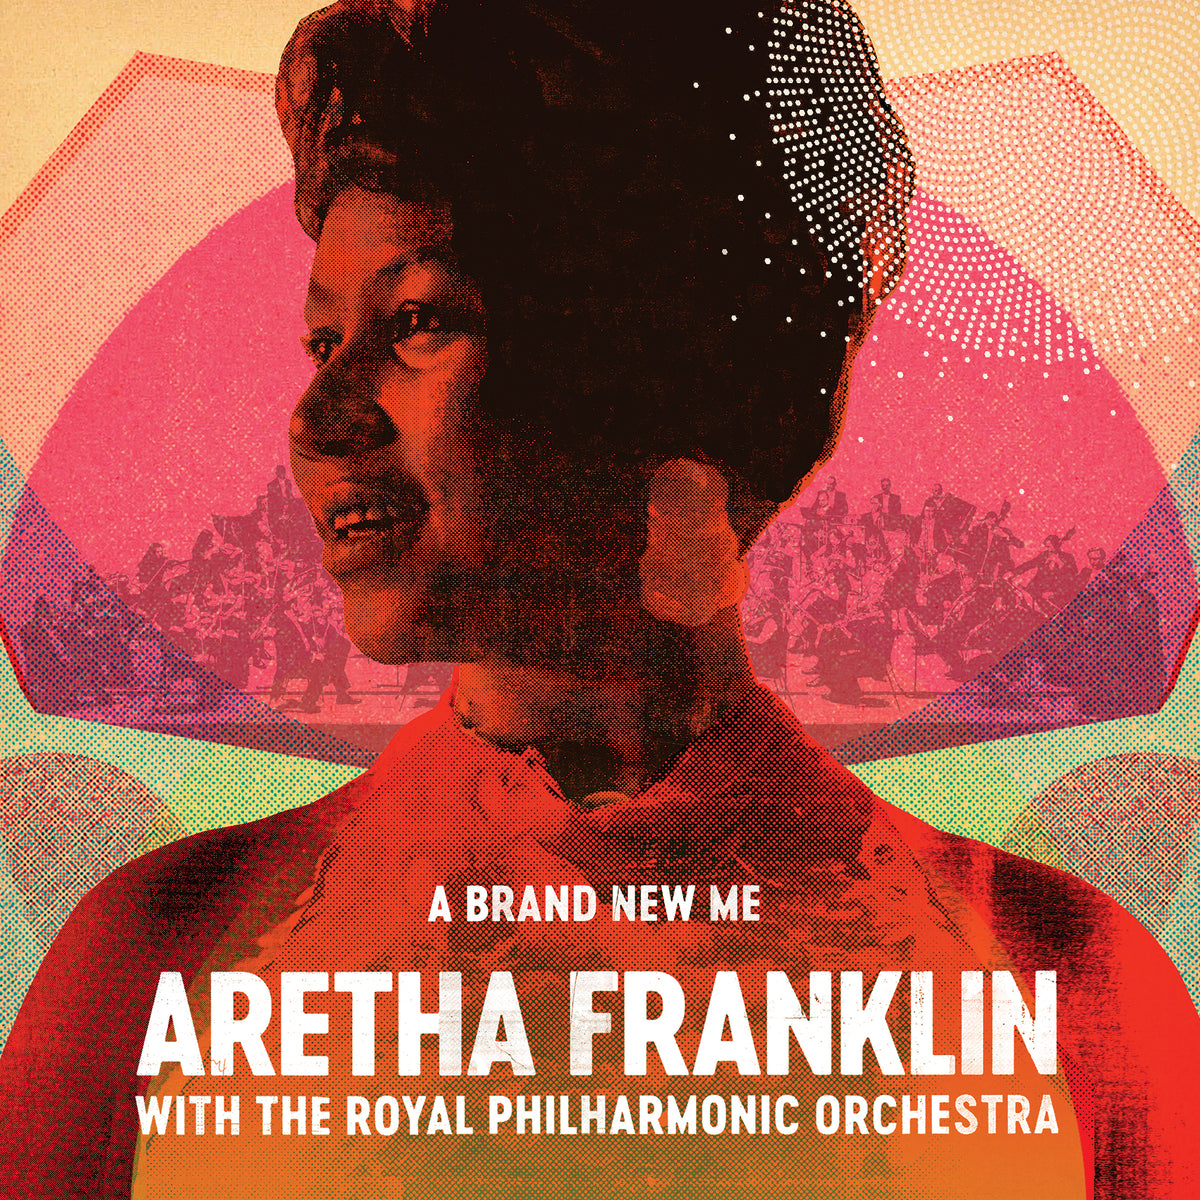 Aretha Franklin with the Royal Philharmonic Orchestra - A Brand New Me